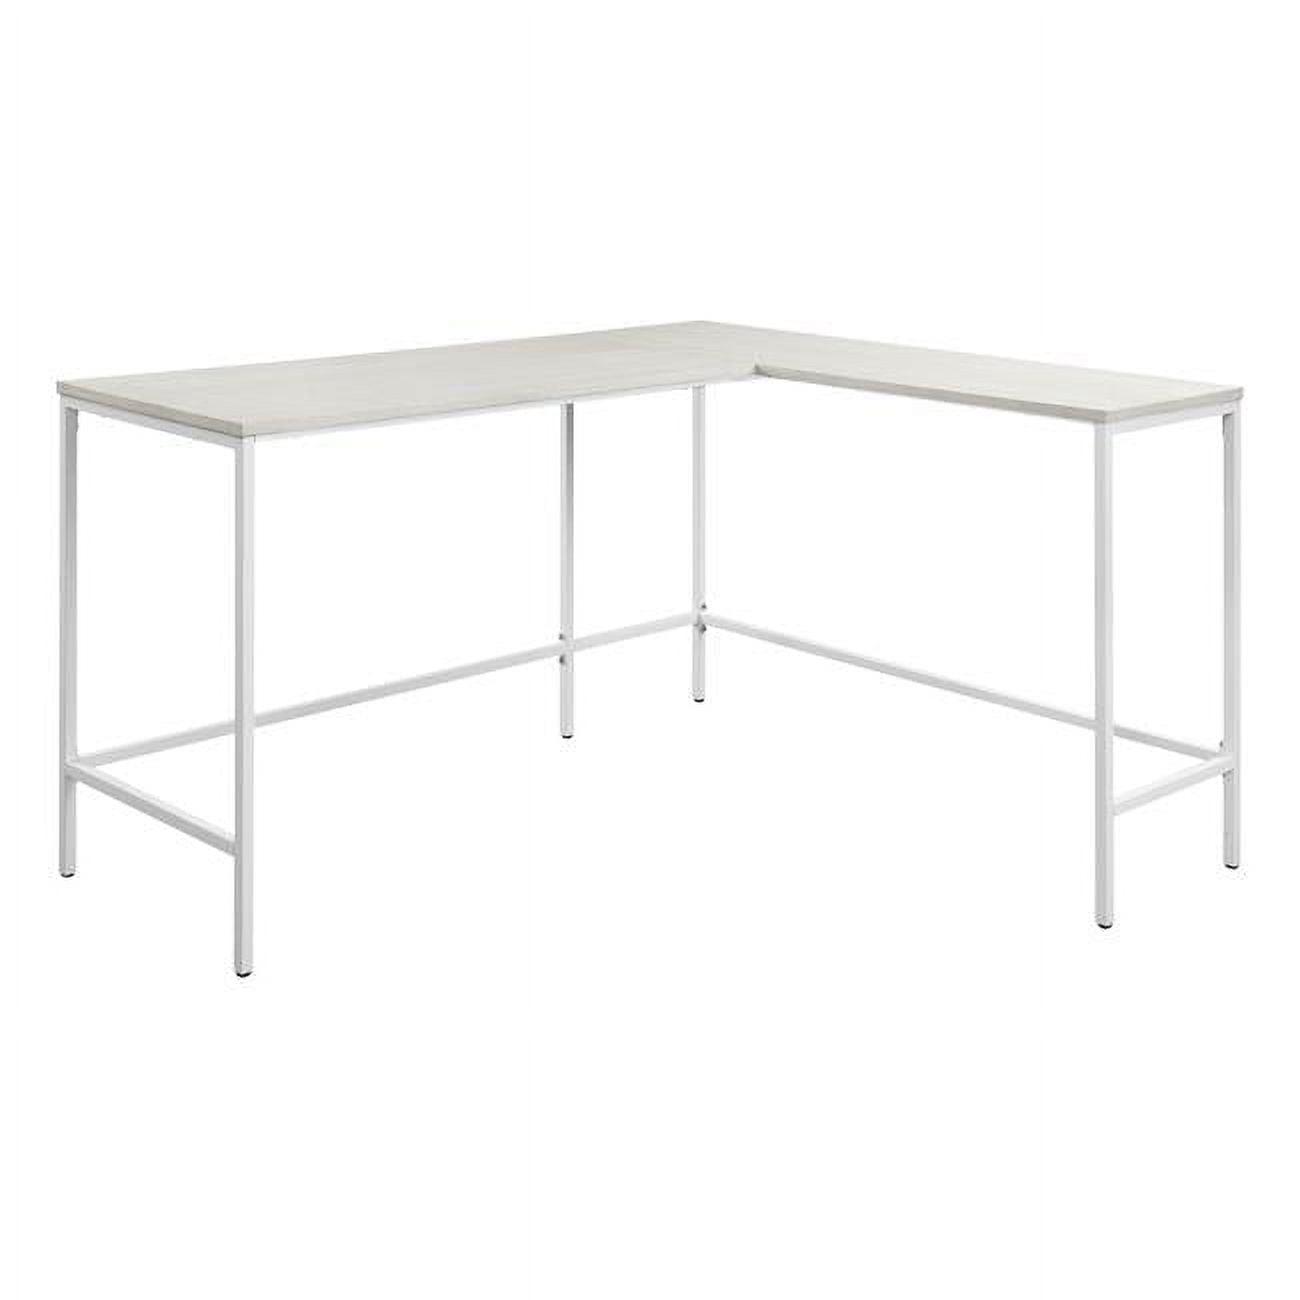 Contempo White Oak Adjustable L-Shaped Desk with Filing Drawer